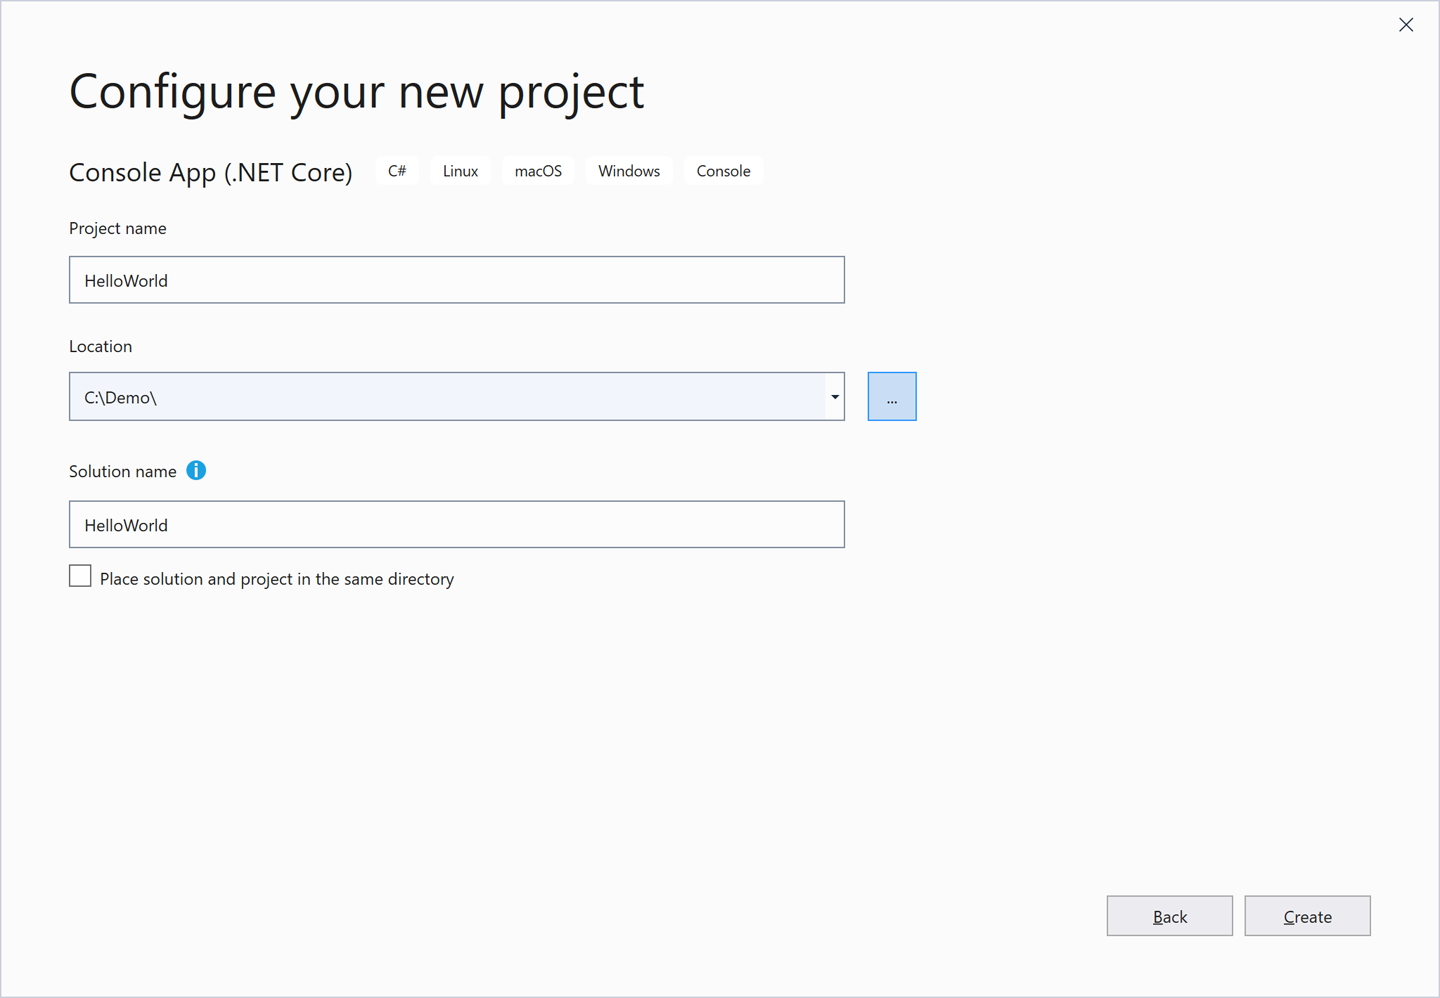 The Configure your new project dialog